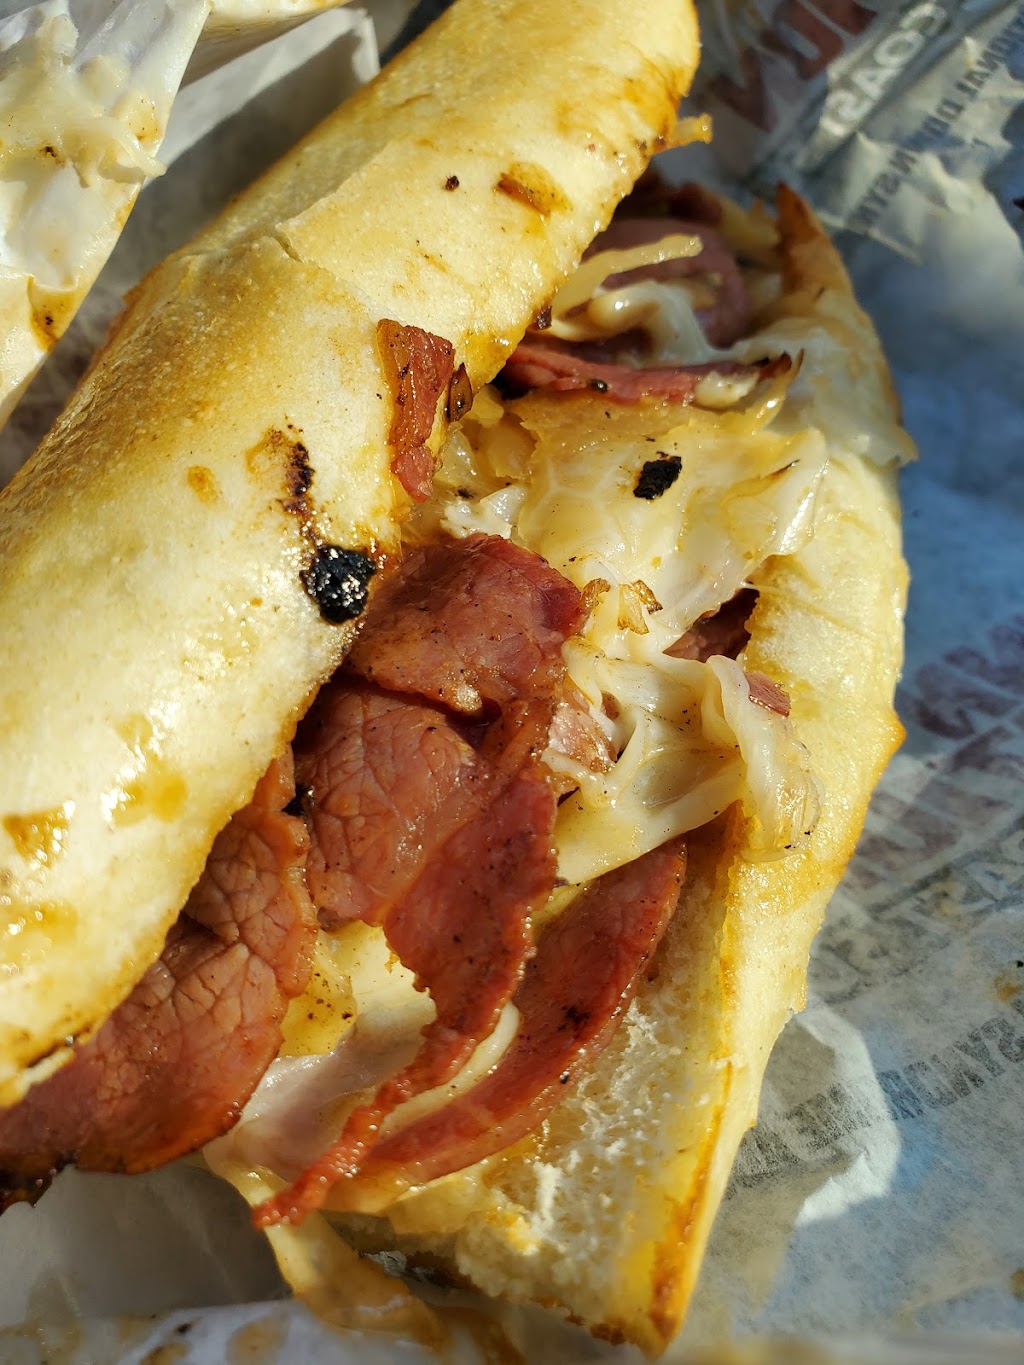 Penn Station East Coast Subs | 6258 Mayfield Rd, Mayfield Heights, OH 44124, USA | Phone: (440) 449-1400